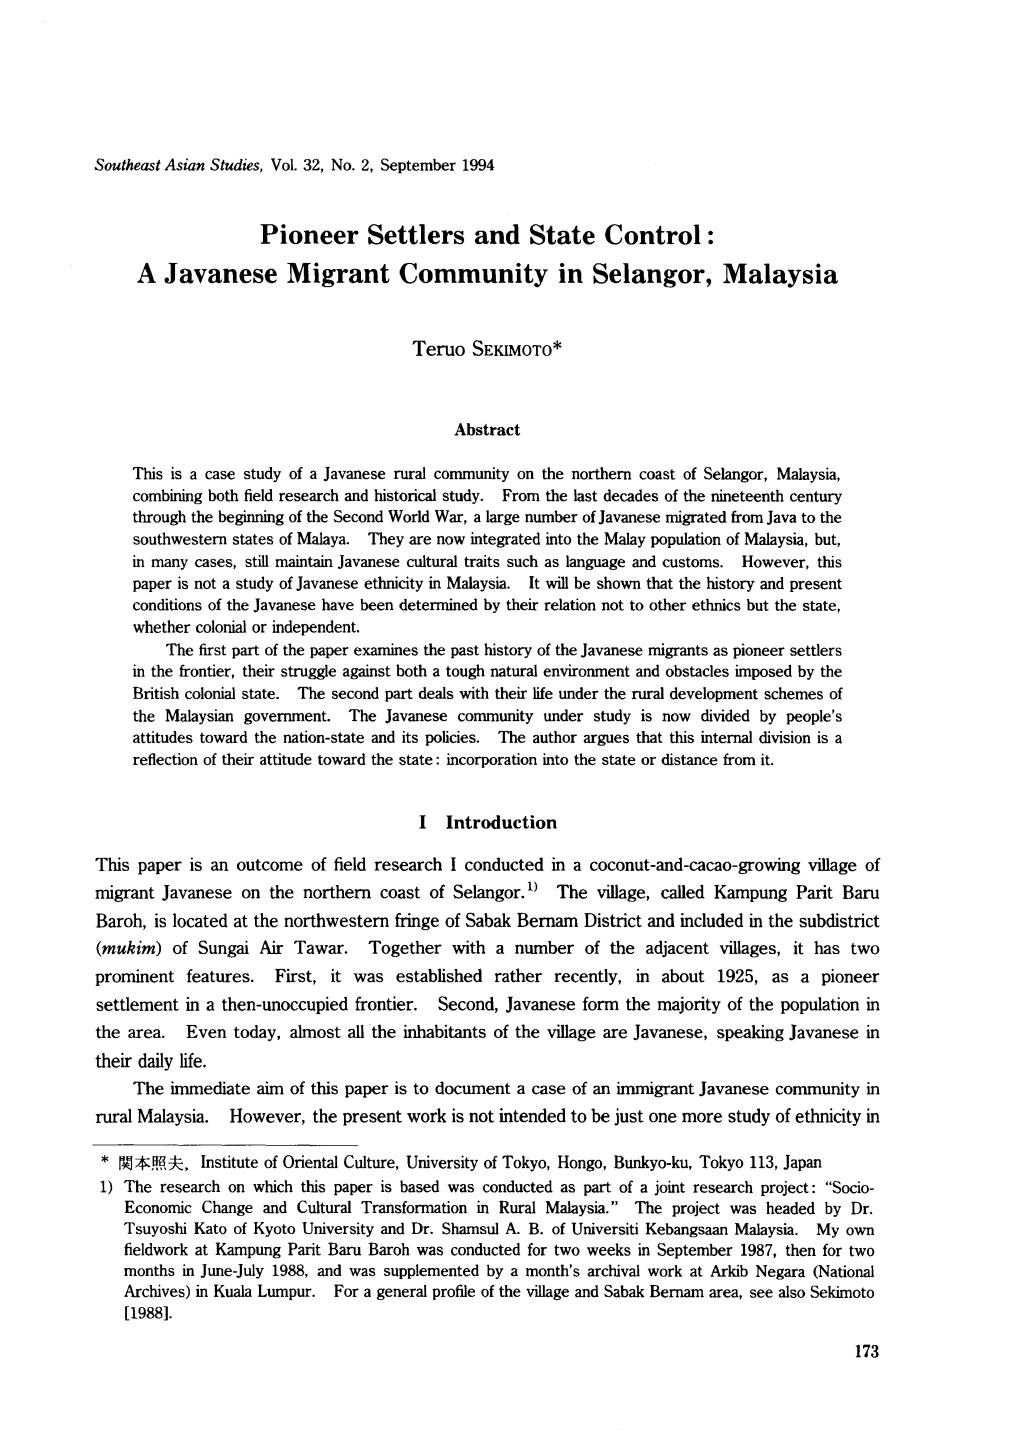 Pioneer Settlers and State Control: a Javanese Migrant Community in Selangor, Malaysia